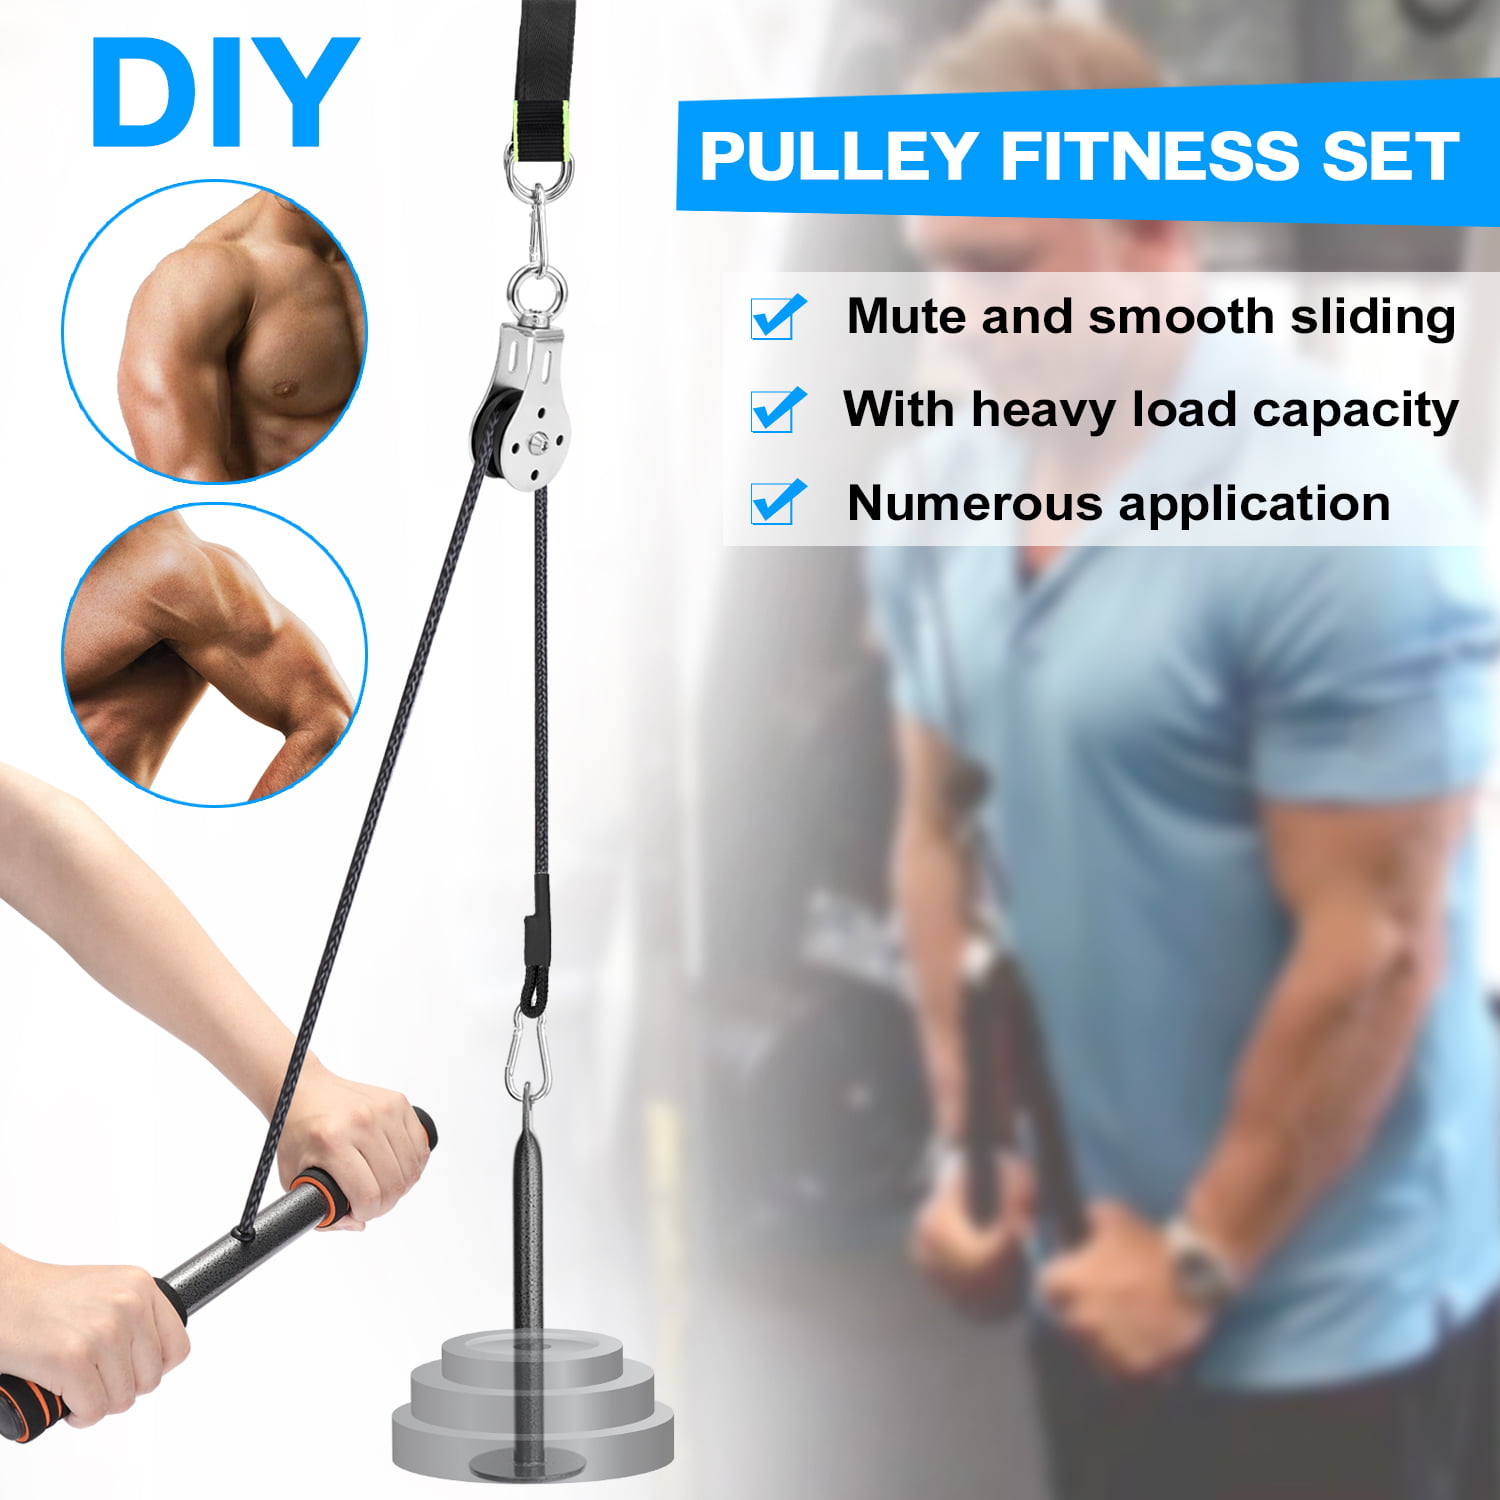 Fitness Pulley Cable Gym Workout Equipment Machine Attachment System Home DIY 